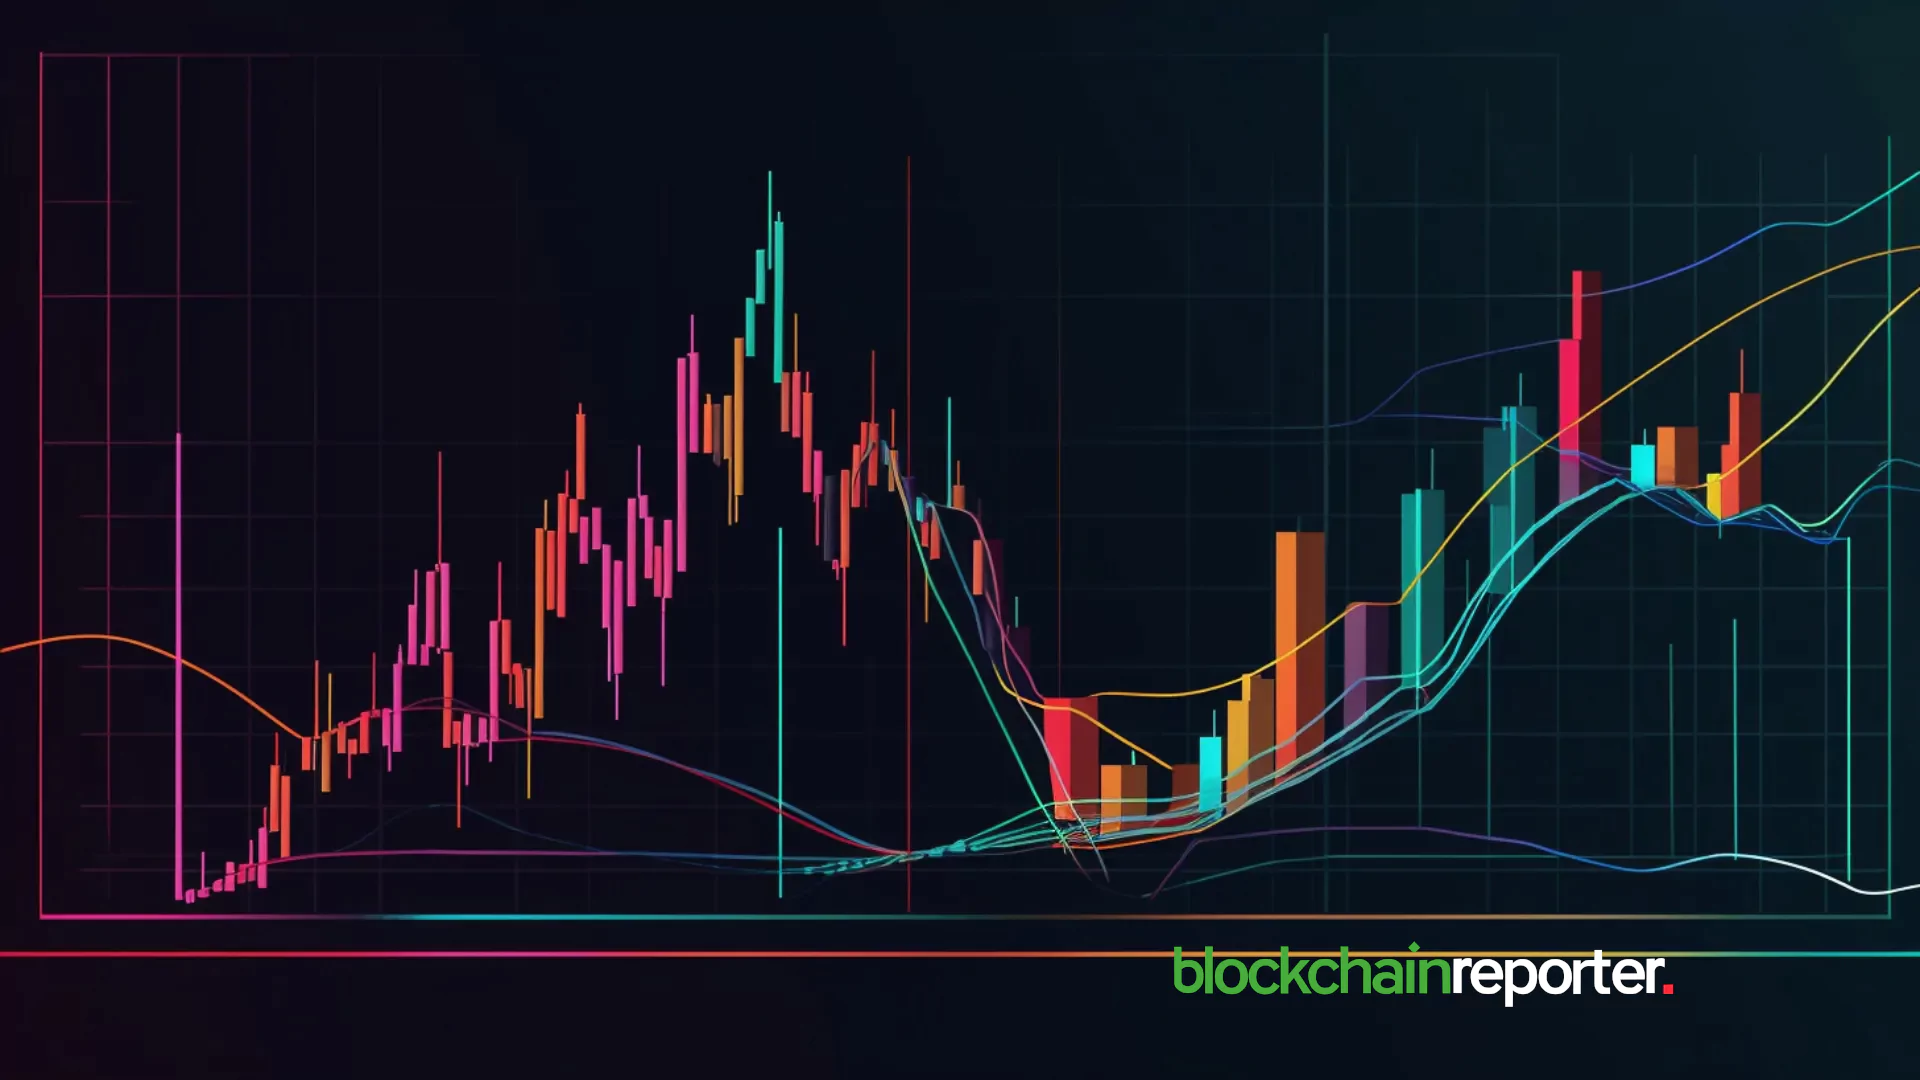 Watch Out, Crypto Traders: This Week’s Events Could Ignite Volatility